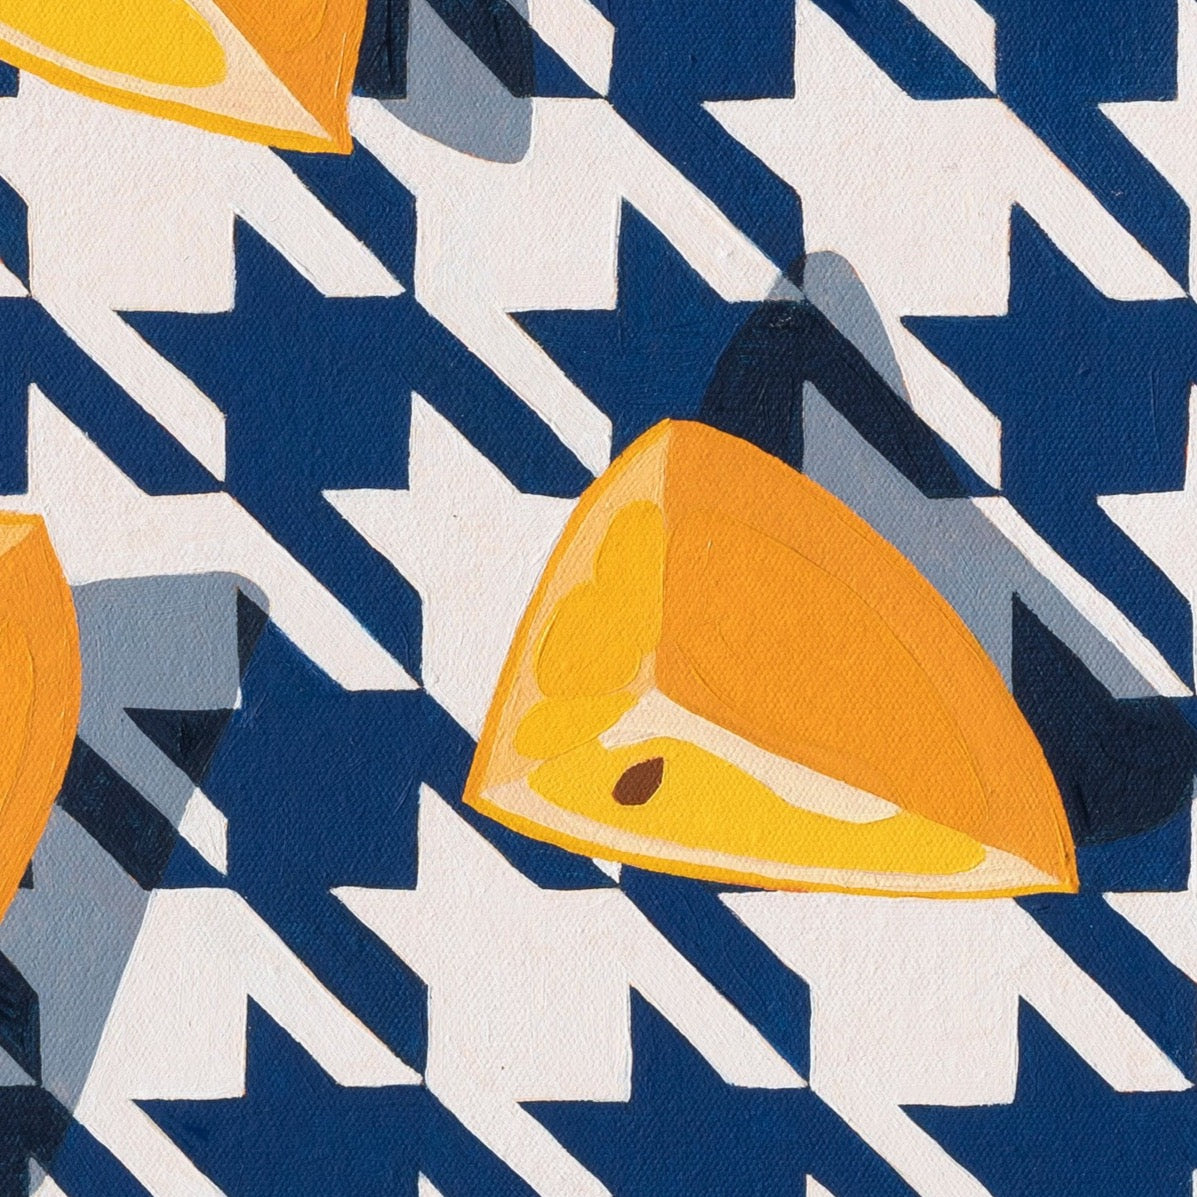 closeup of an original oil painting of three wedges of yellow lemons on a navy blue and white houndstooth background with blue-grey shadows